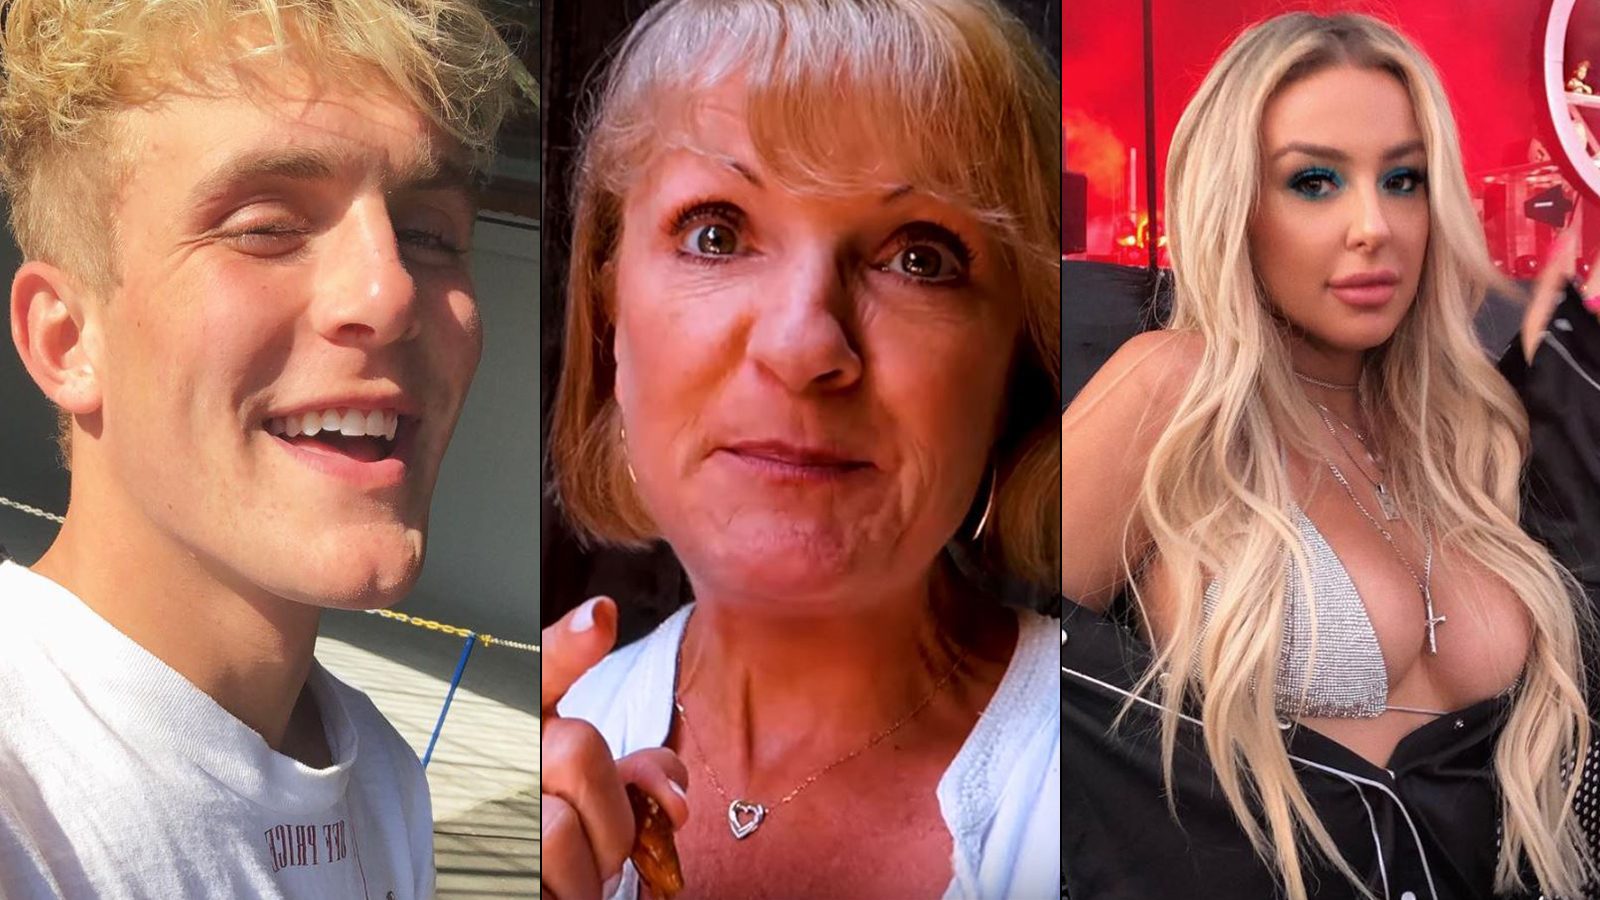 Jake Pauls mom throws shade at Tana Mongeau after meeting her for